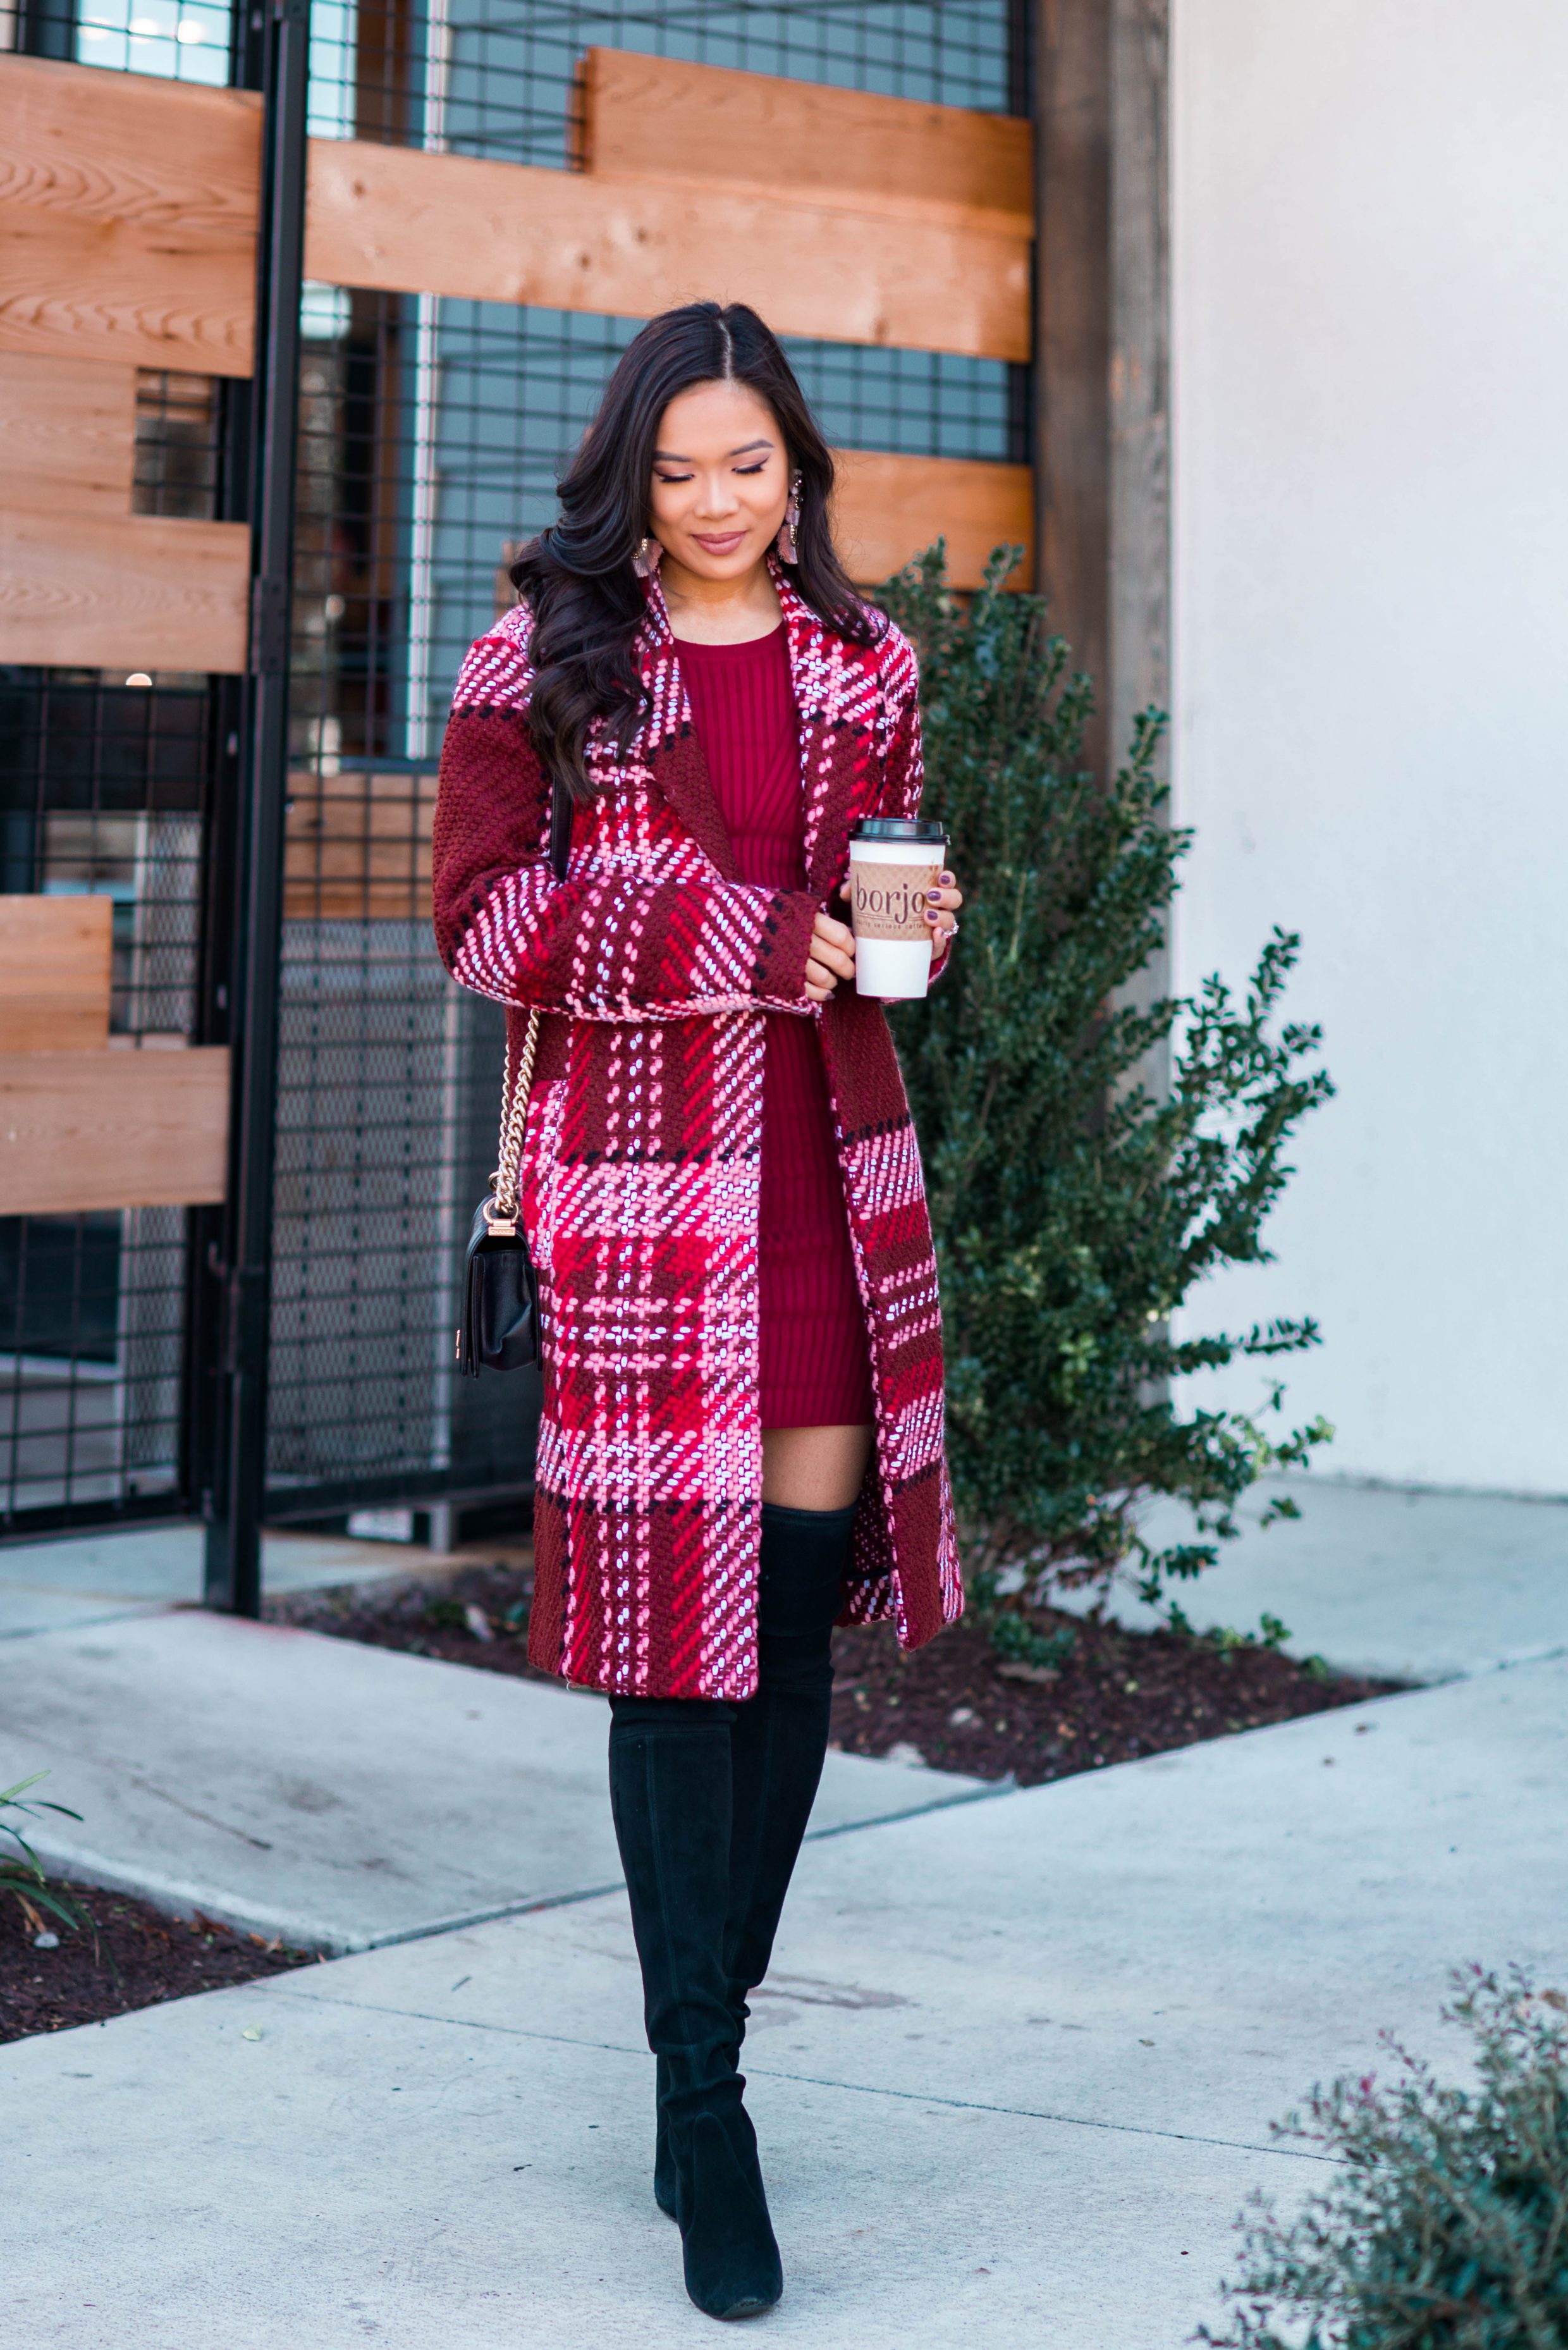 Blogger Hoang-Kim styles a plaid statement coat for fall and winter